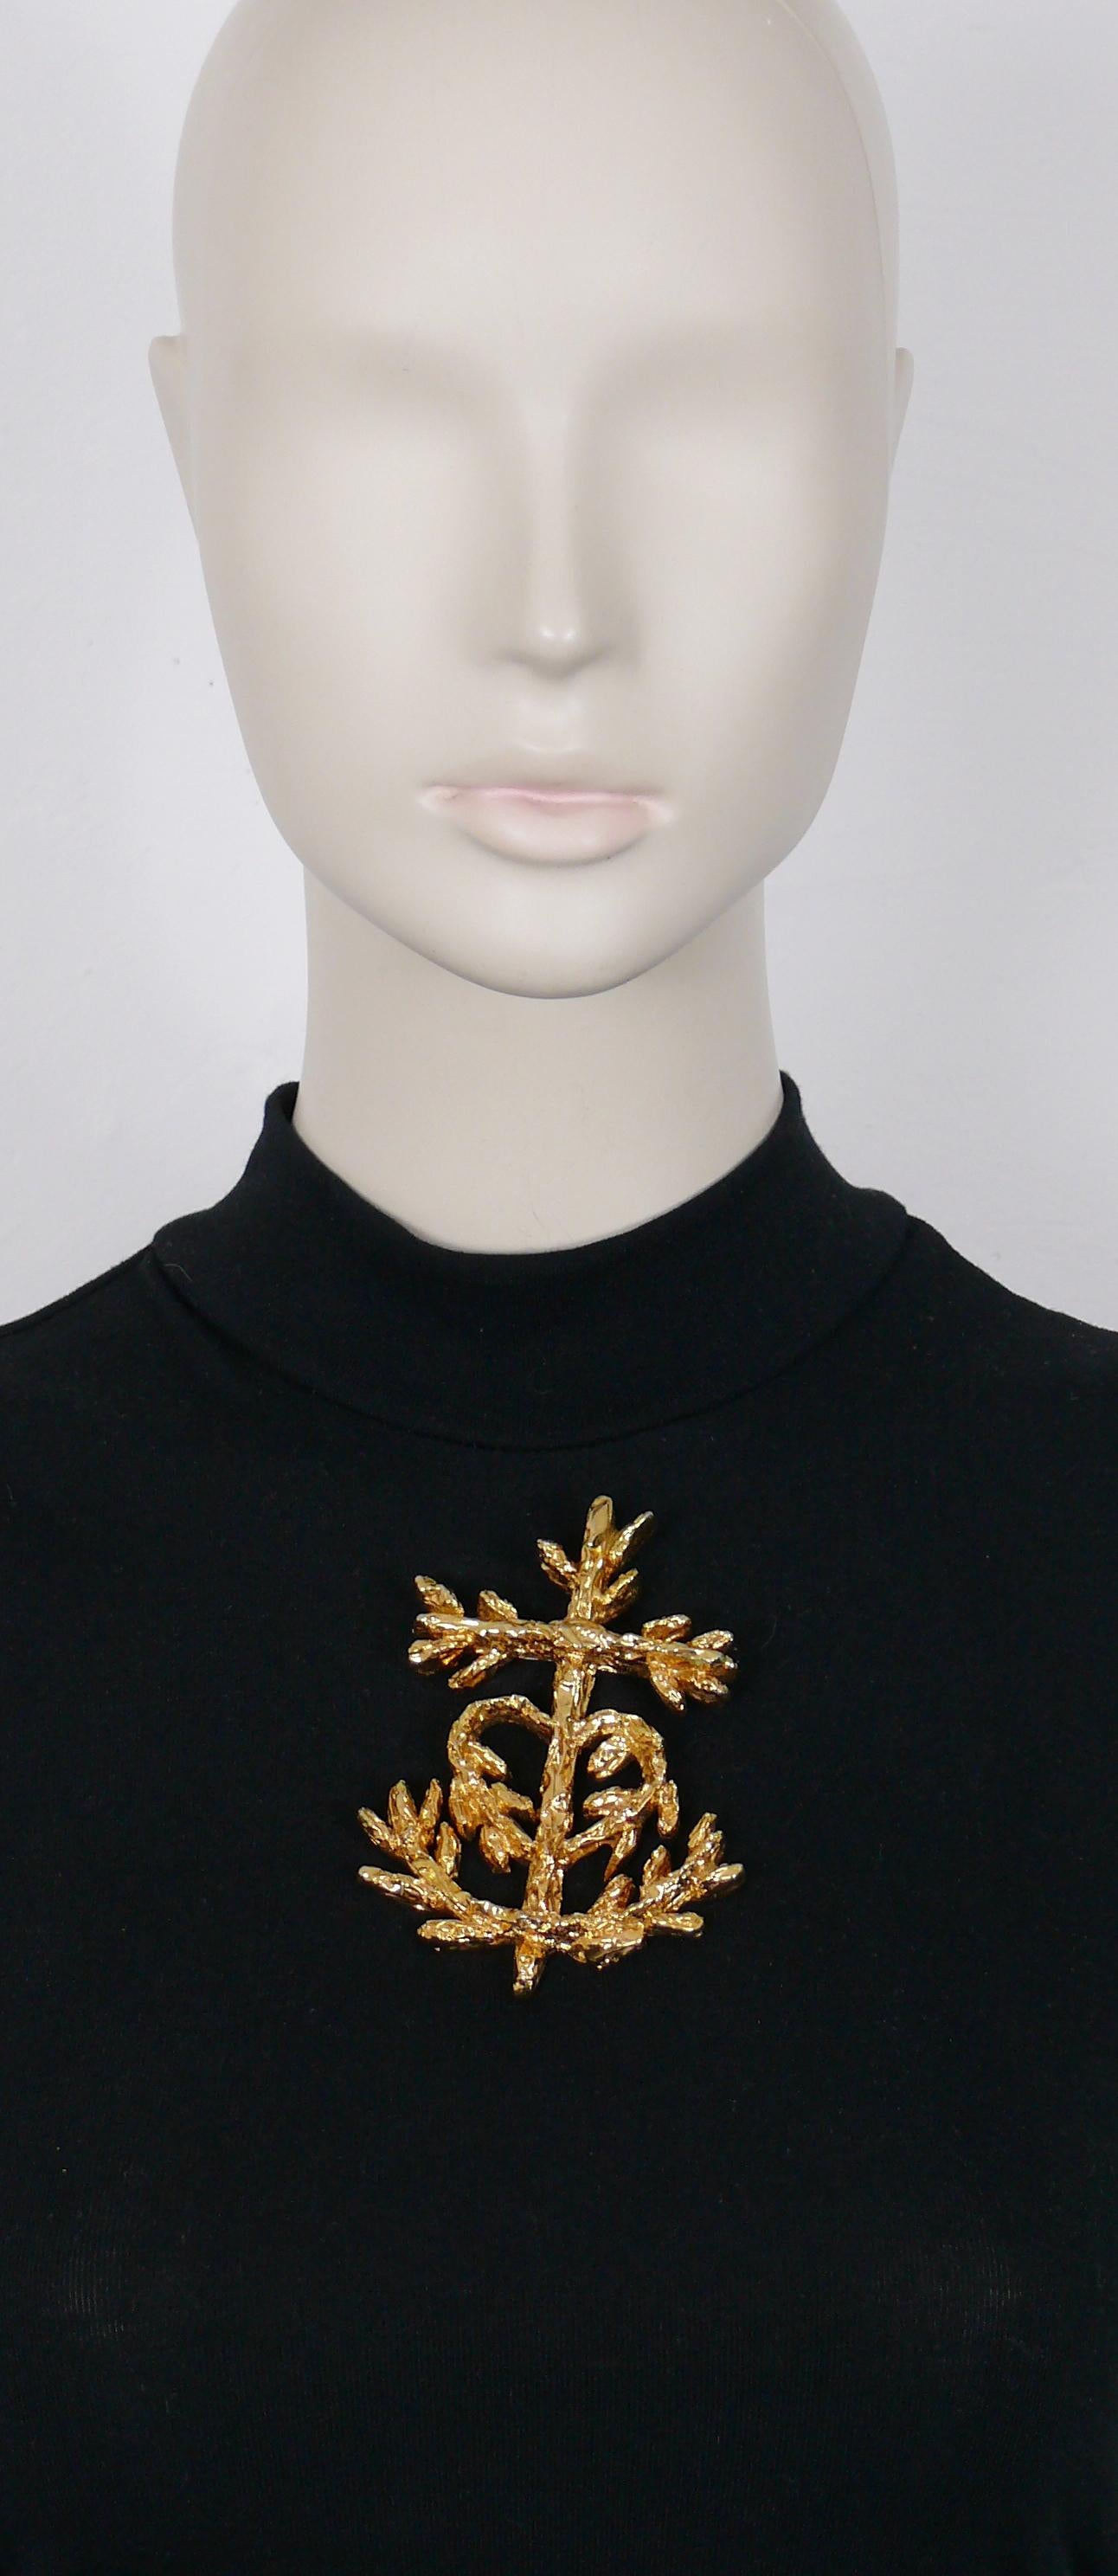 CHRISTIAN LACROIX vintage resin brooch featuring an iconic Camarguaise cross with a branch design.

Gilt resin.

Marked CHRISTIAN LACROIX CL Made in France.

Indicative measurements : height approx. 10 cm (3.94 inches) / max. width approx. 7.2 cm